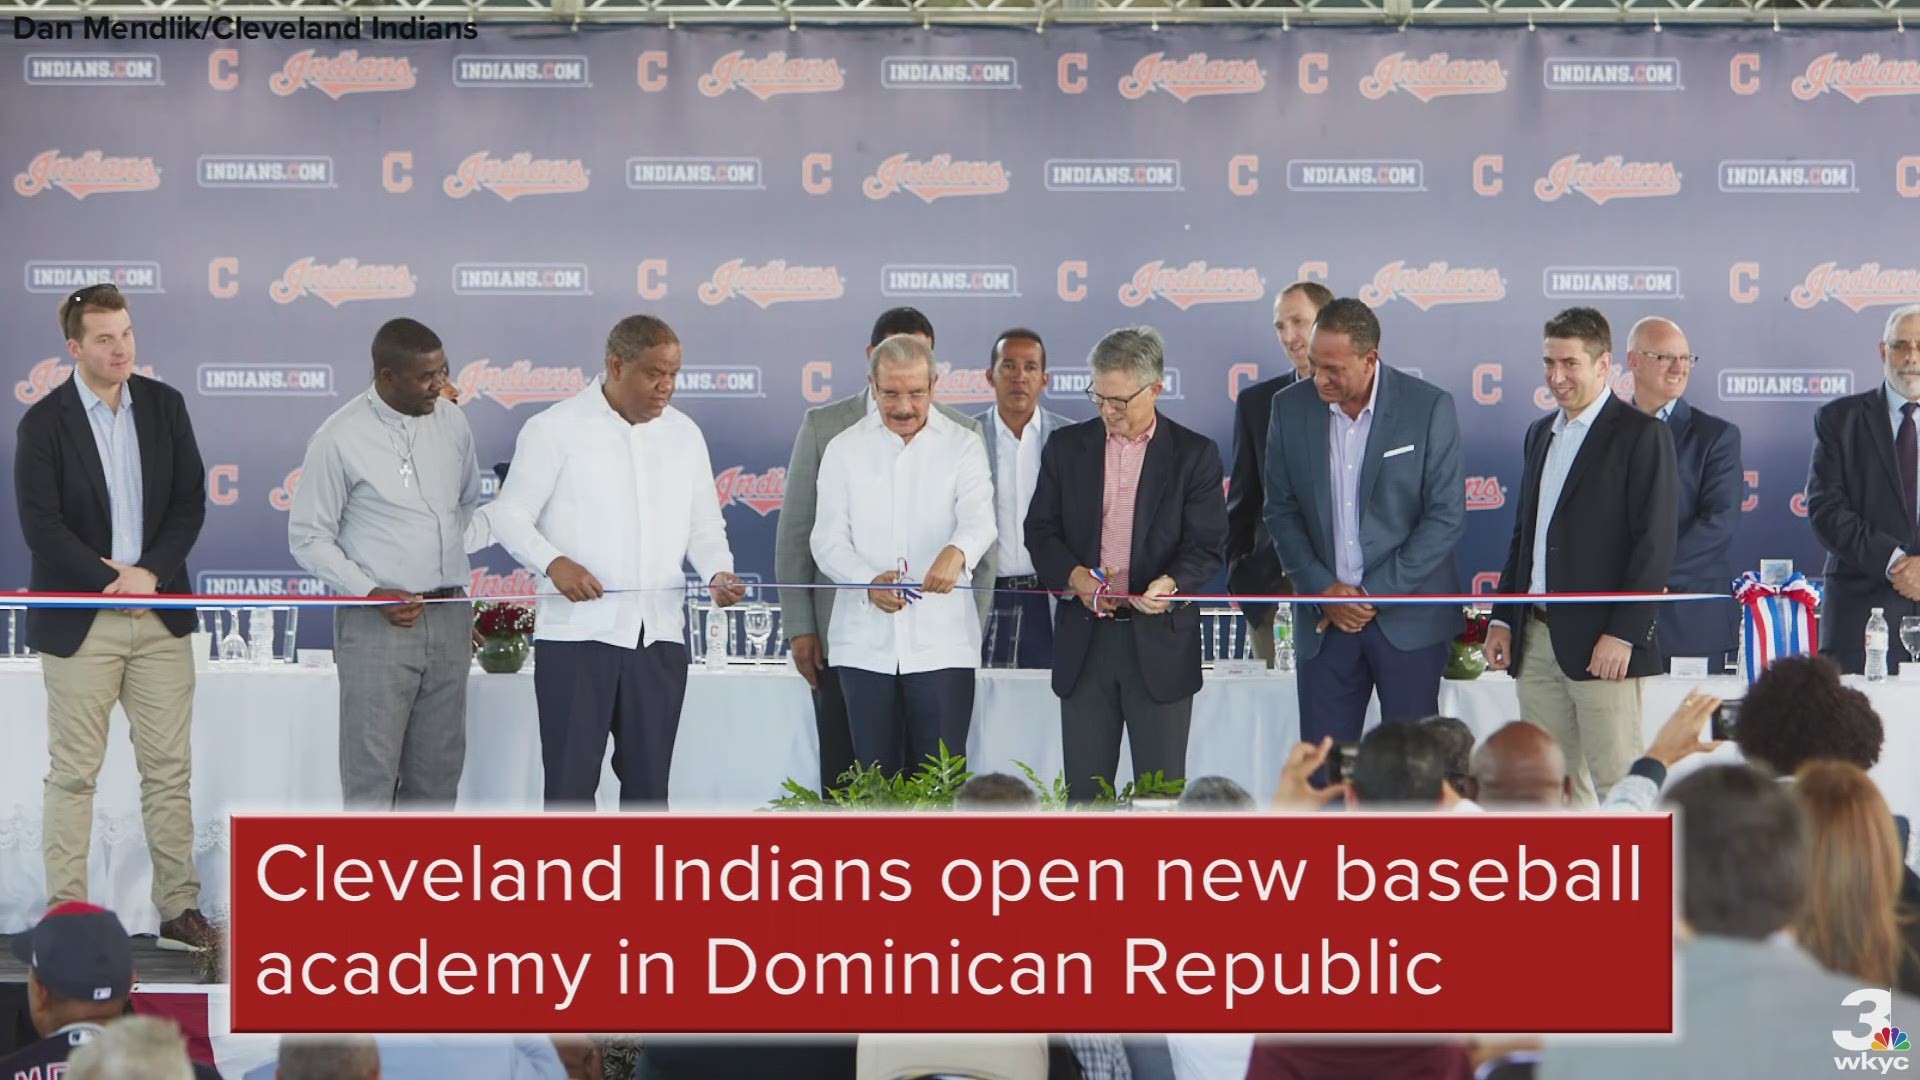 The Cleveland Indians opened a new state-of-the-art baseball academy in the Dominican Republic Tuesday.